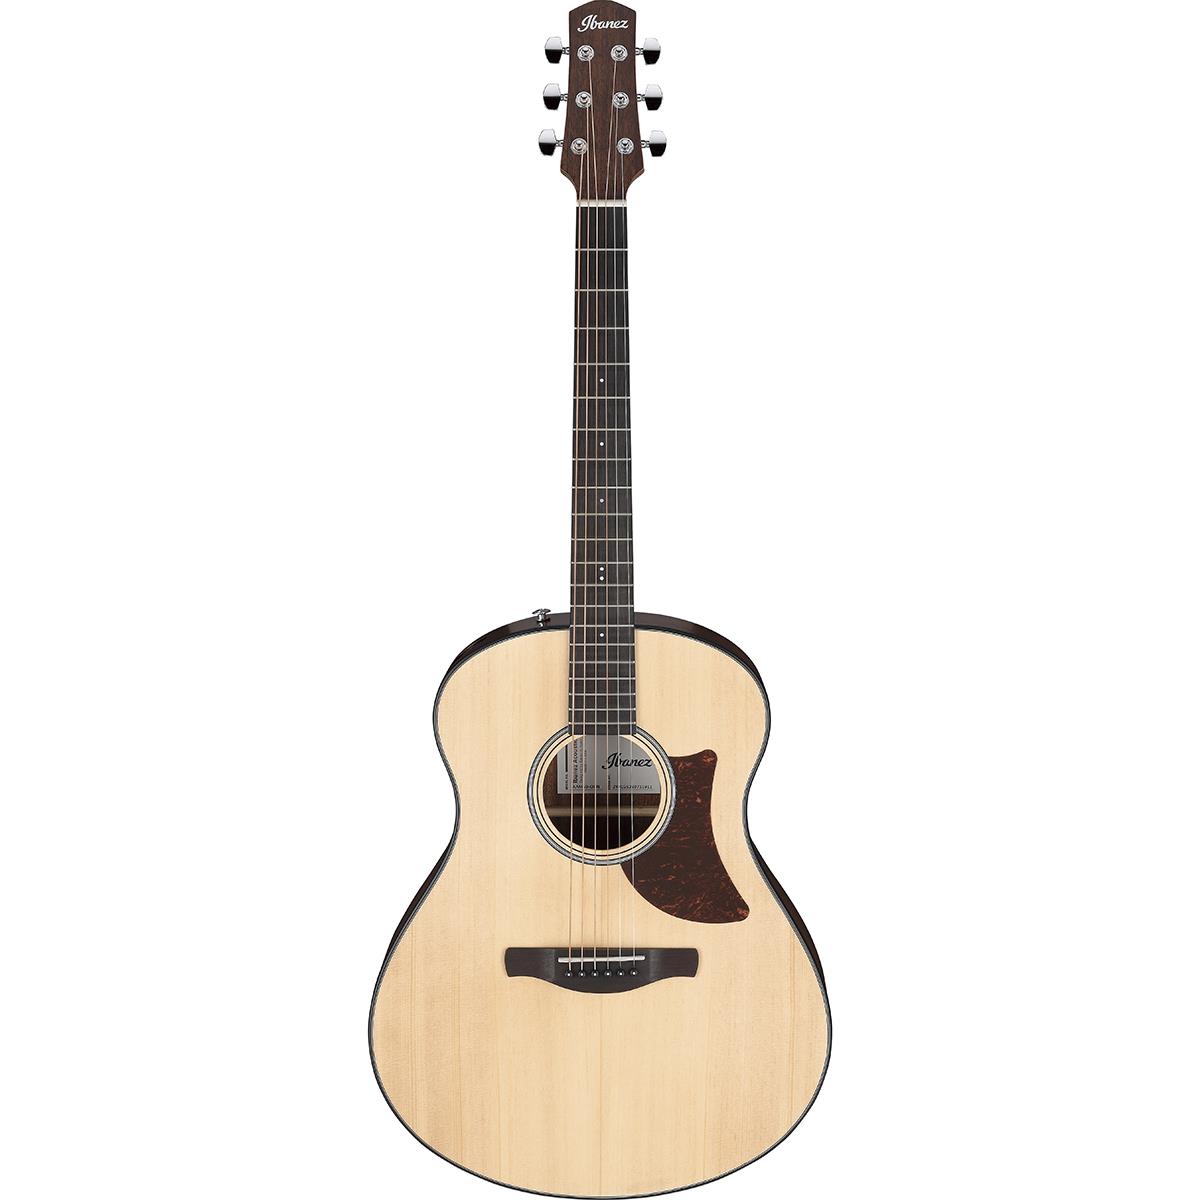 Image of Ibanez Advanced Acoustic Series AAM50 Acoustic Guitar